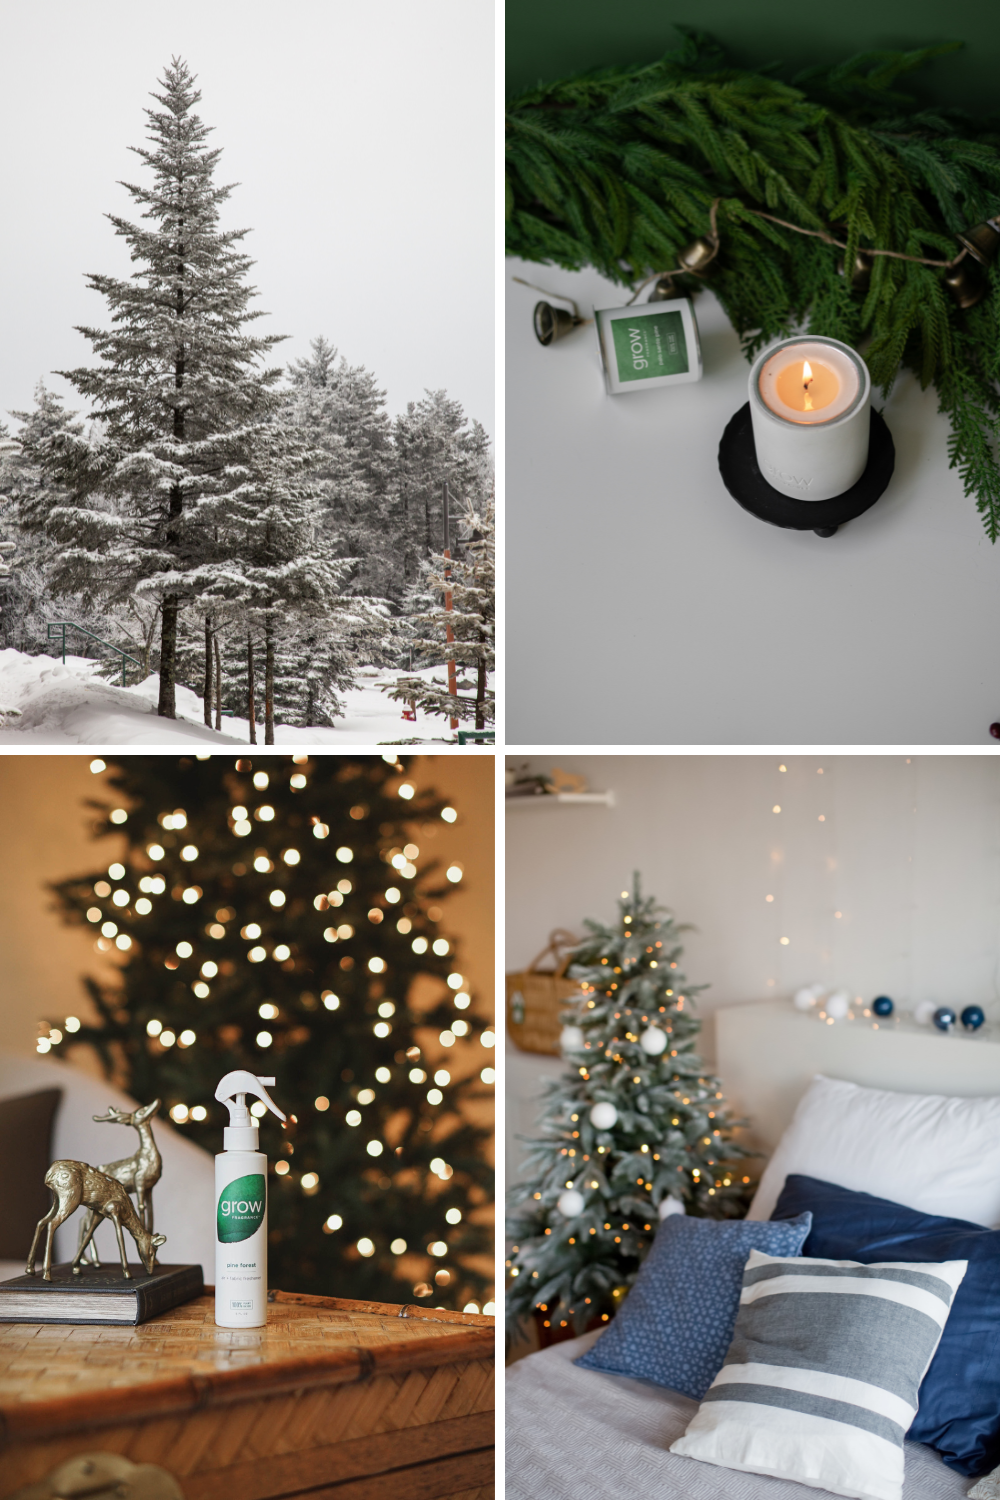 Discover the best pine tree-scented candle and nontoxic air + fabric freshener for a clean and refreshing home this winter. Our guide covers top-rated winter scents, home fragrance tips, and more